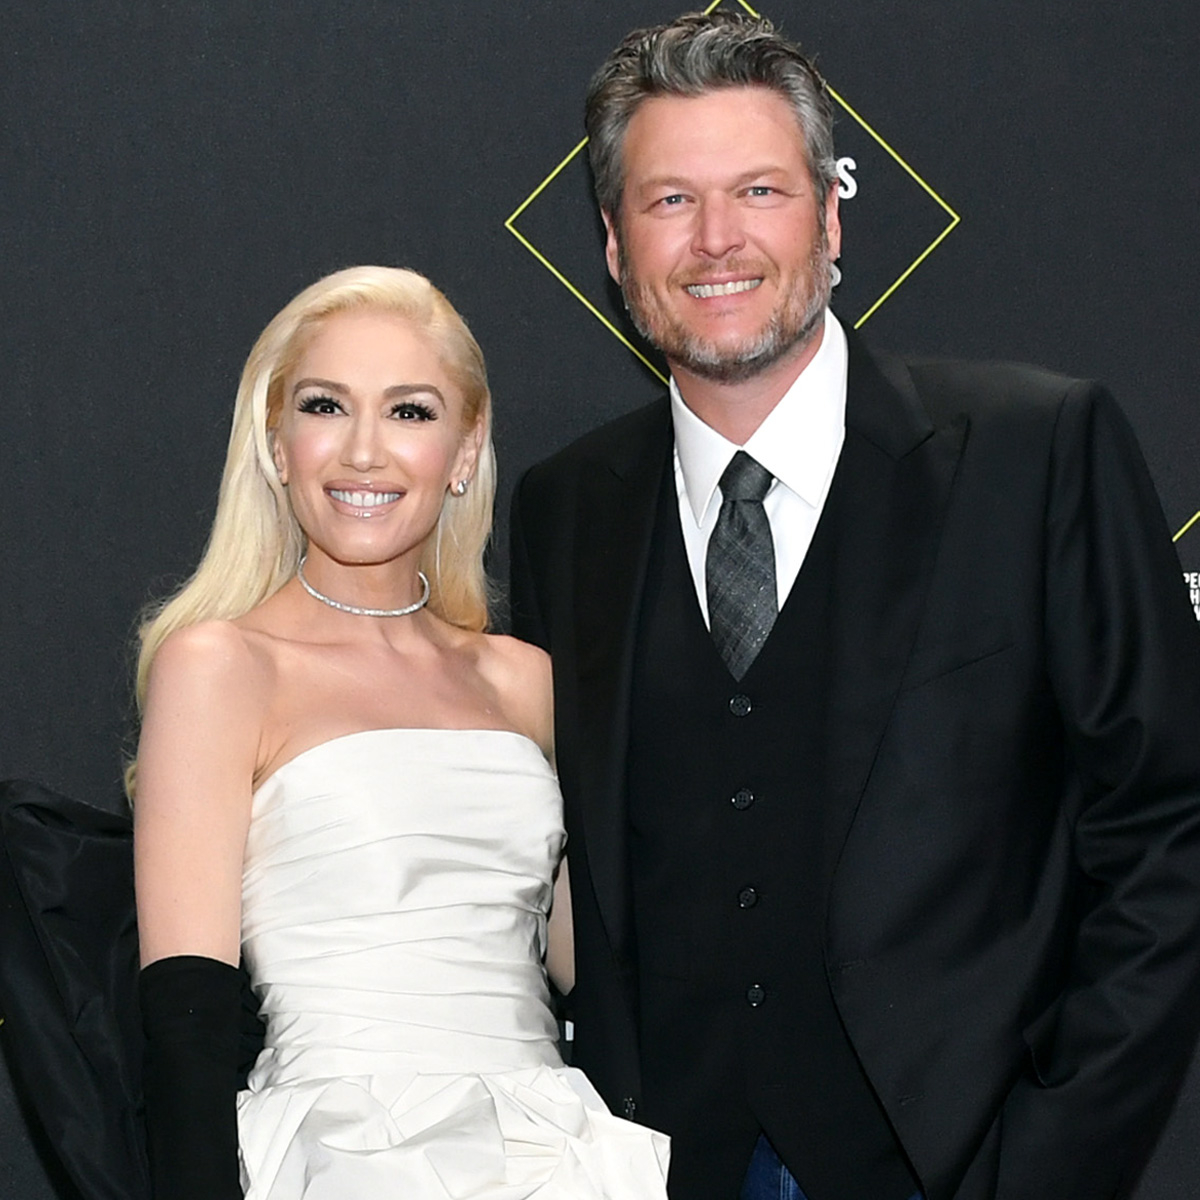 Gwen Stefani Reveals Her and Blake Shelton’s Sweet New Hobby and New Year’s Resolution – E! Online